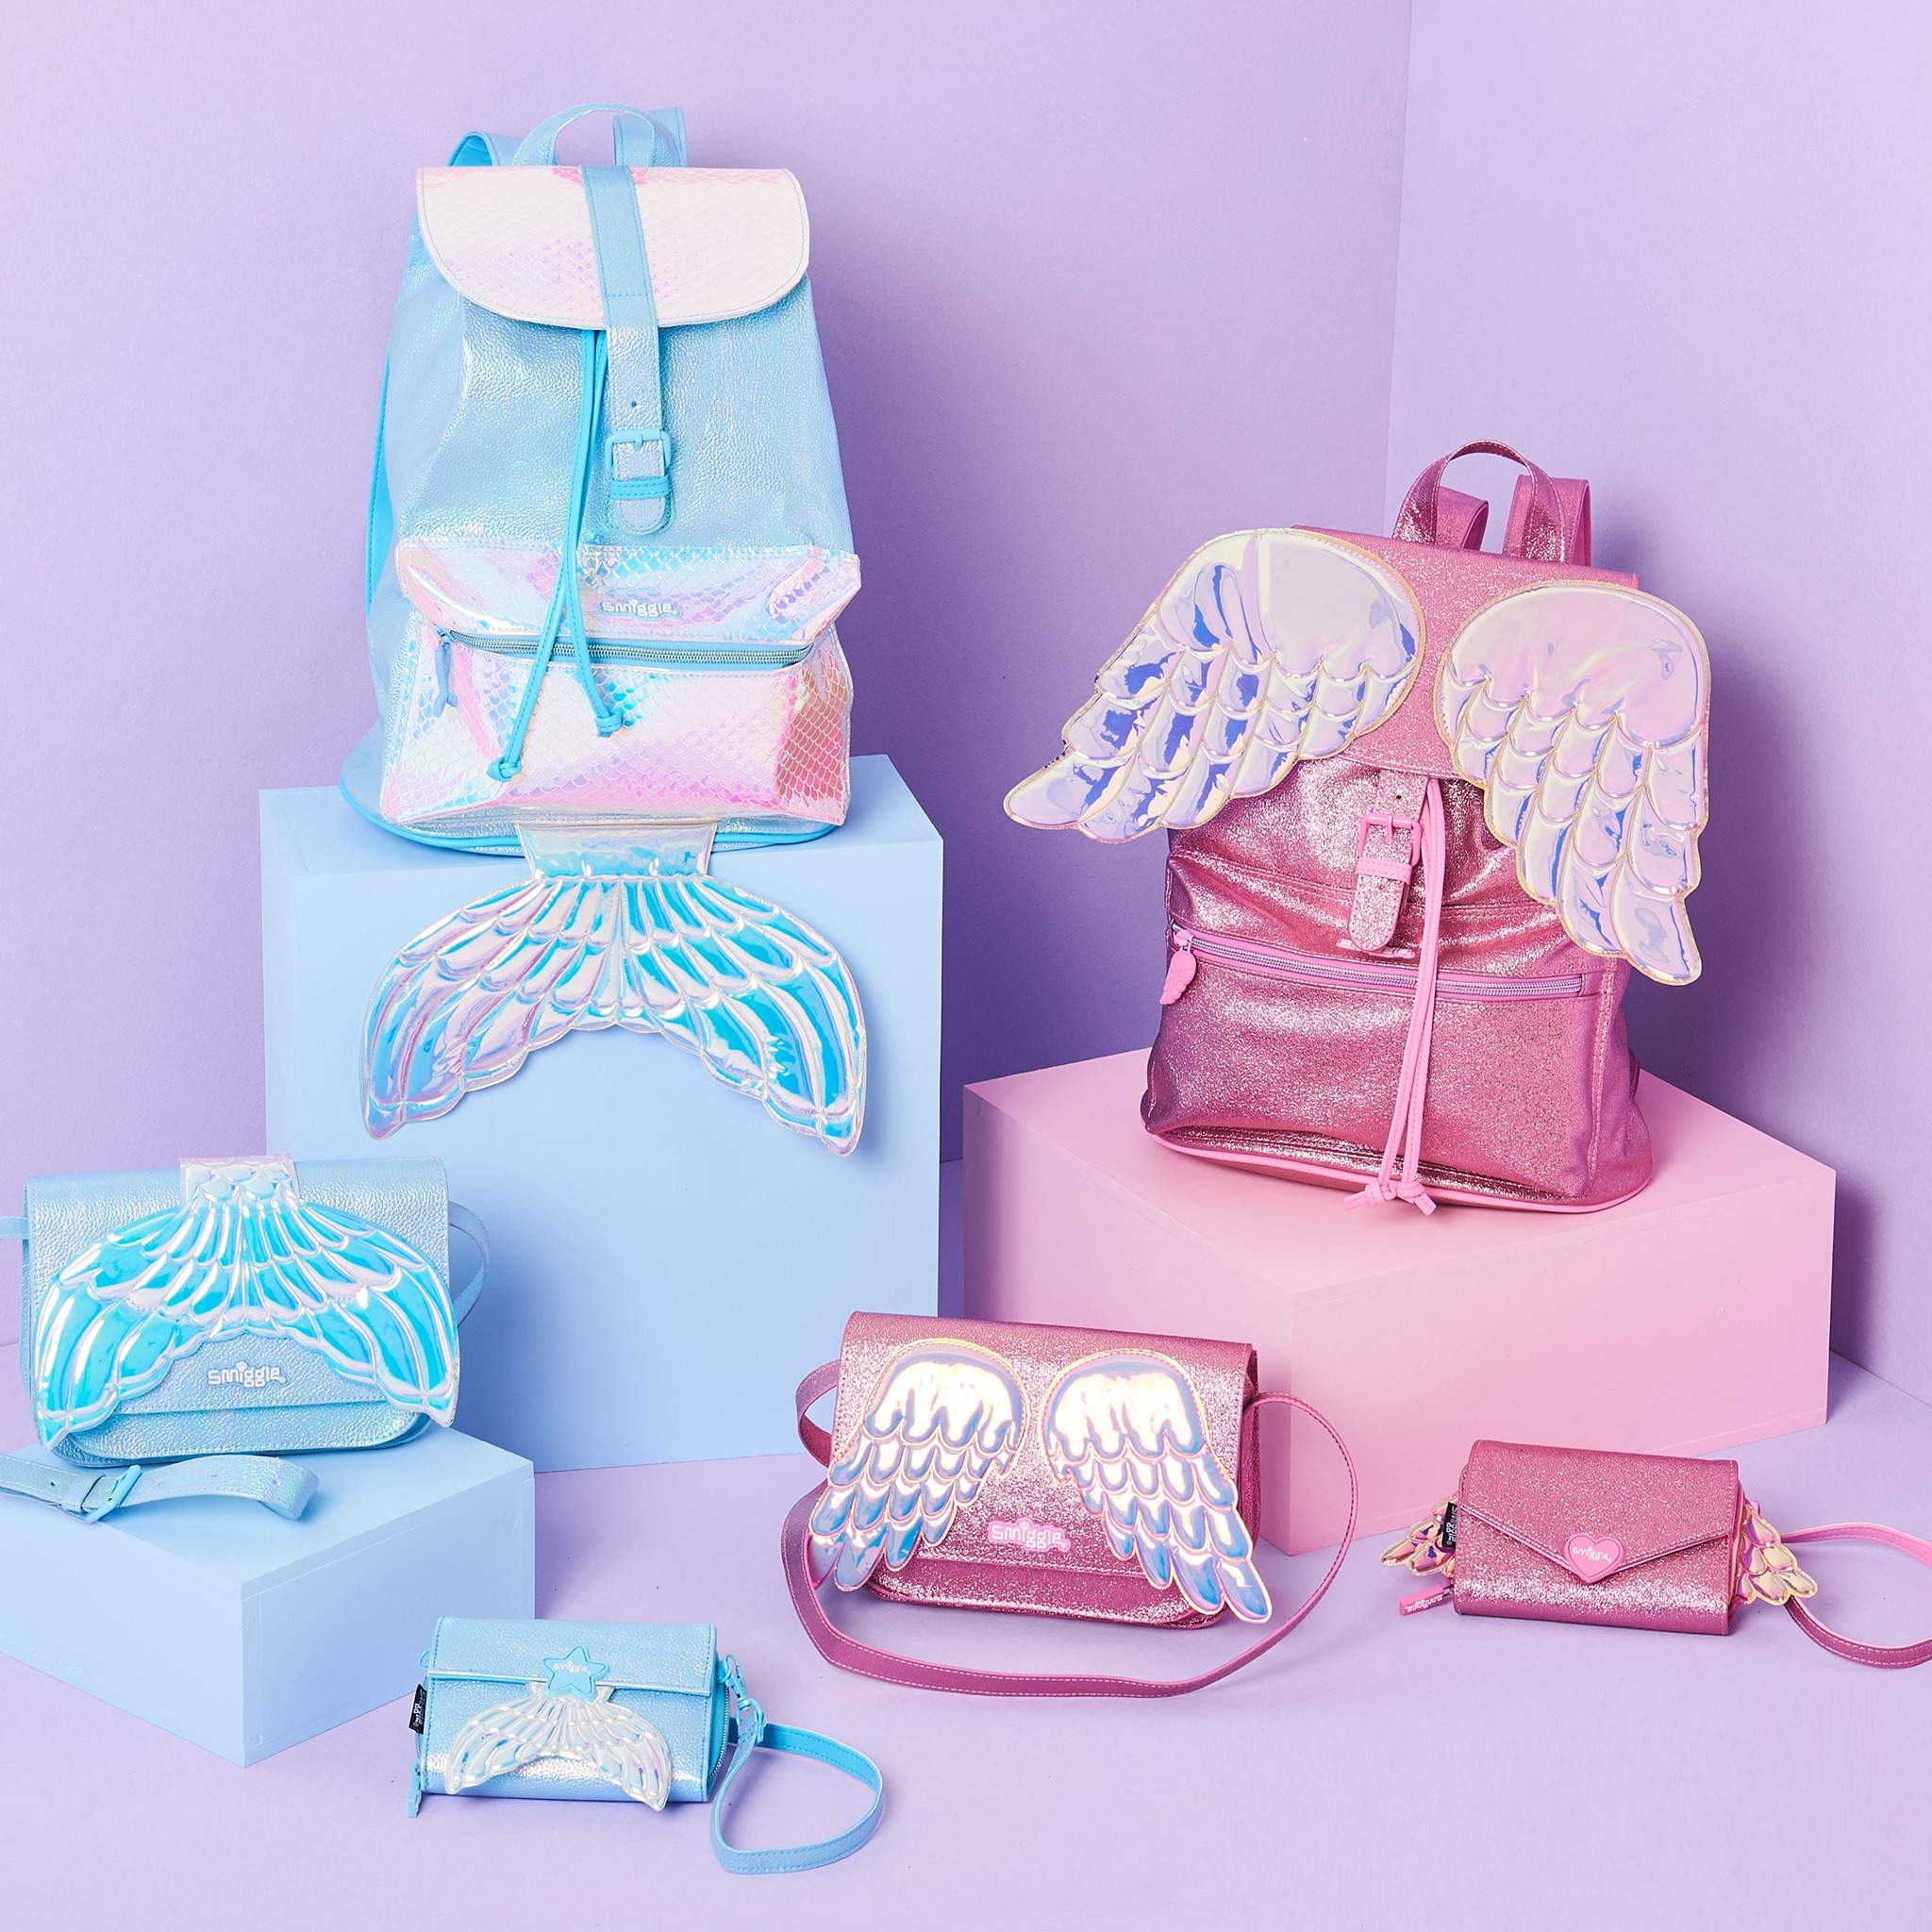 We 💖 Unicorns & Mermaids ! our new magical collection is perfect gift! get the set instore now! 😍